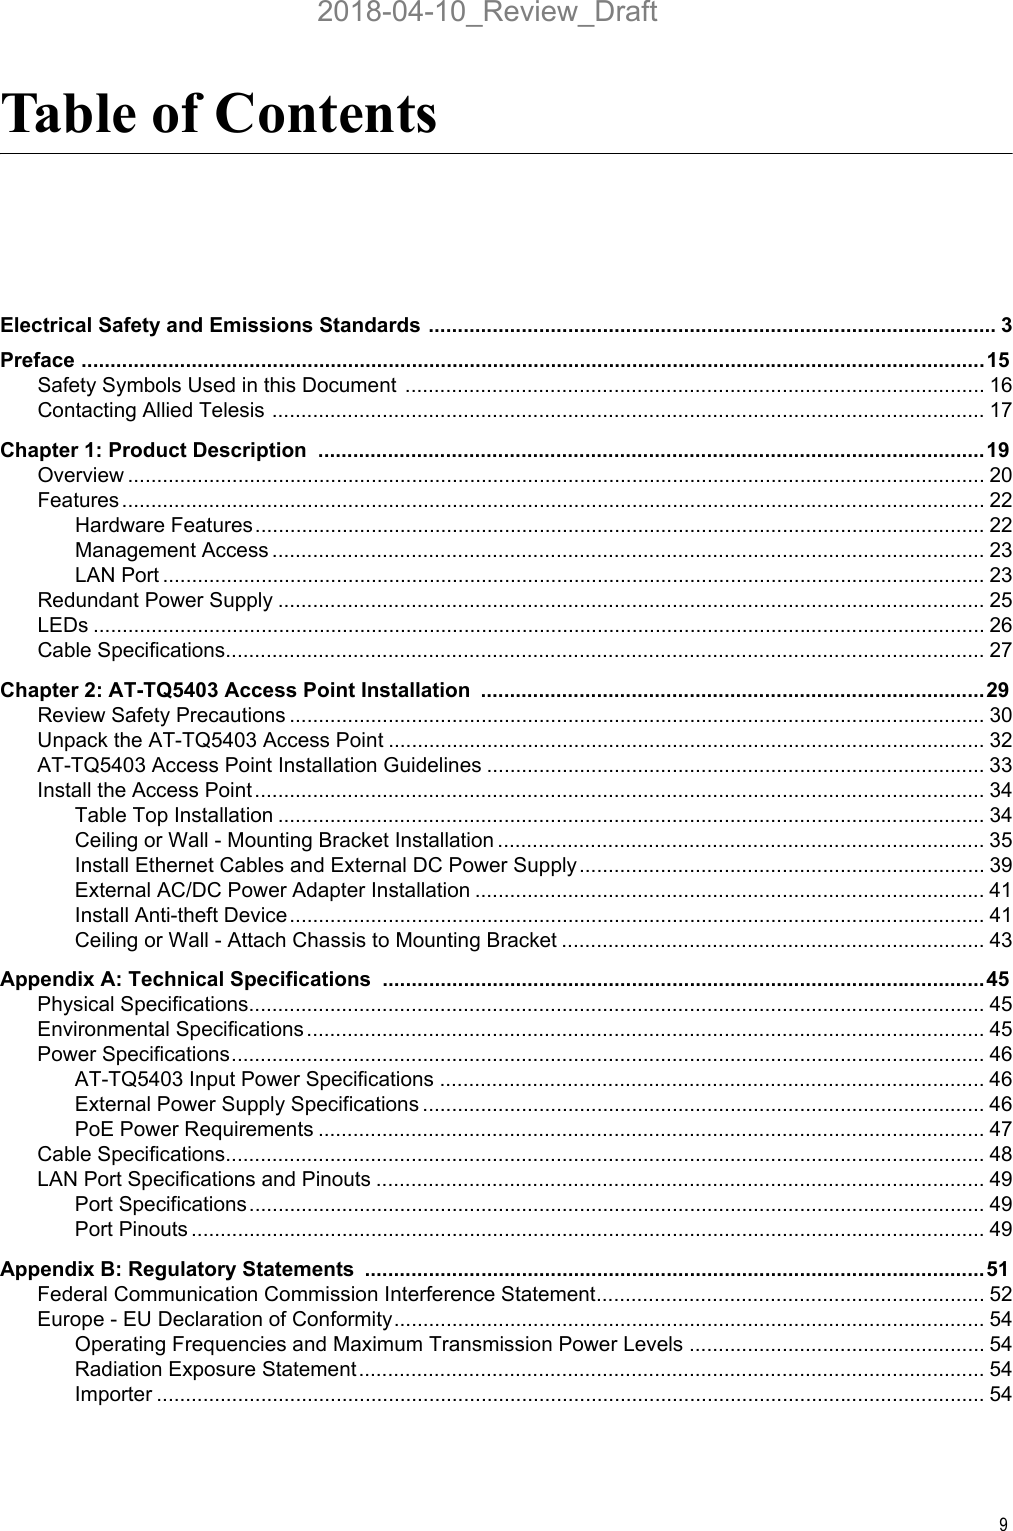 9Table of ContentsElectrical Safety and Emissions Standards .................................................................................................. 3Preface ............................................................................................................................................................15Safety Symbols Used in this Document  .................................................................................................... 16Contacting Allied Telesis ........................................................................................................................... 17Chapter 1: Product Description  ...................................................................................................................19Overview .................................................................................................................................................... 20Features..................................................................................................................................................... 22Hardware Features.............................................................................................................................. 22Management Access ........................................................................................................................... 23LAN Port .............................................................................................................................................. 23Redundant Power Supply .......................................................................................................................... 25LEDs .......................................................................................................................................................... 26Cable Specifications................................................................................................................................... 27Chapter 2: AT-TQ5403 Access Point Installation .......................................................................................29Review Safety Precautions ........................................................................................................................ 30Unpack the AT-TQ5403 Access Point ....................................................................................................... 32AT-TQ5403 Access Point Installation Guidelines ...................................................................................... 33Install the Access Point .............................................................................................................................. 34Table Top Installation .......................................................................................................................... 34Ceiling or Wall - Mounting Bracket Installation .................................................................................... 35Install Ethernet Cables and External DC Power Supply...................................................................... 39External AC/DC Power Adapter Installation ........................................................................................ 41Install Anti-theft Device........................................................................................................................ 41Ceiling or Wall - Attach Chassis to Mounting Bracket ......................................................................... 43Appendix A: Technical Specifications ........................................................................................................45Physical Specifications............................................................................................................................... 45Environmental Specifications ..................................................................................................................... 45Power Specifications.................................................................................................................................. 46AT-TQ5403 Input Power Specifications .............................................................................................. 46External Power Supply Specifications ................................................................................................. 46PoE Power Requirements ................................................................................................................... 47Cable Specifications................................................................................................................................... 48LAN Port Specifications and Pinouts ......................................................................................................... 49Port Specifications............................................................................................................................... 49Port Pinouts ......................................................................................................................................... 49Appendix B: Regulatory Statements  ...........................................................................................................51Federal Communication Commission Interference Statement................................................................... 52Europe - EU Declaration of Conformity...................................................................................................... 54Operating Frequencies and Maximum Transmission Power Levels ................................................... 54Radiation Exposure Statement............................................................................................................ 54Importer ............................................................................................................................................... 542018-04-10_Review_Draft